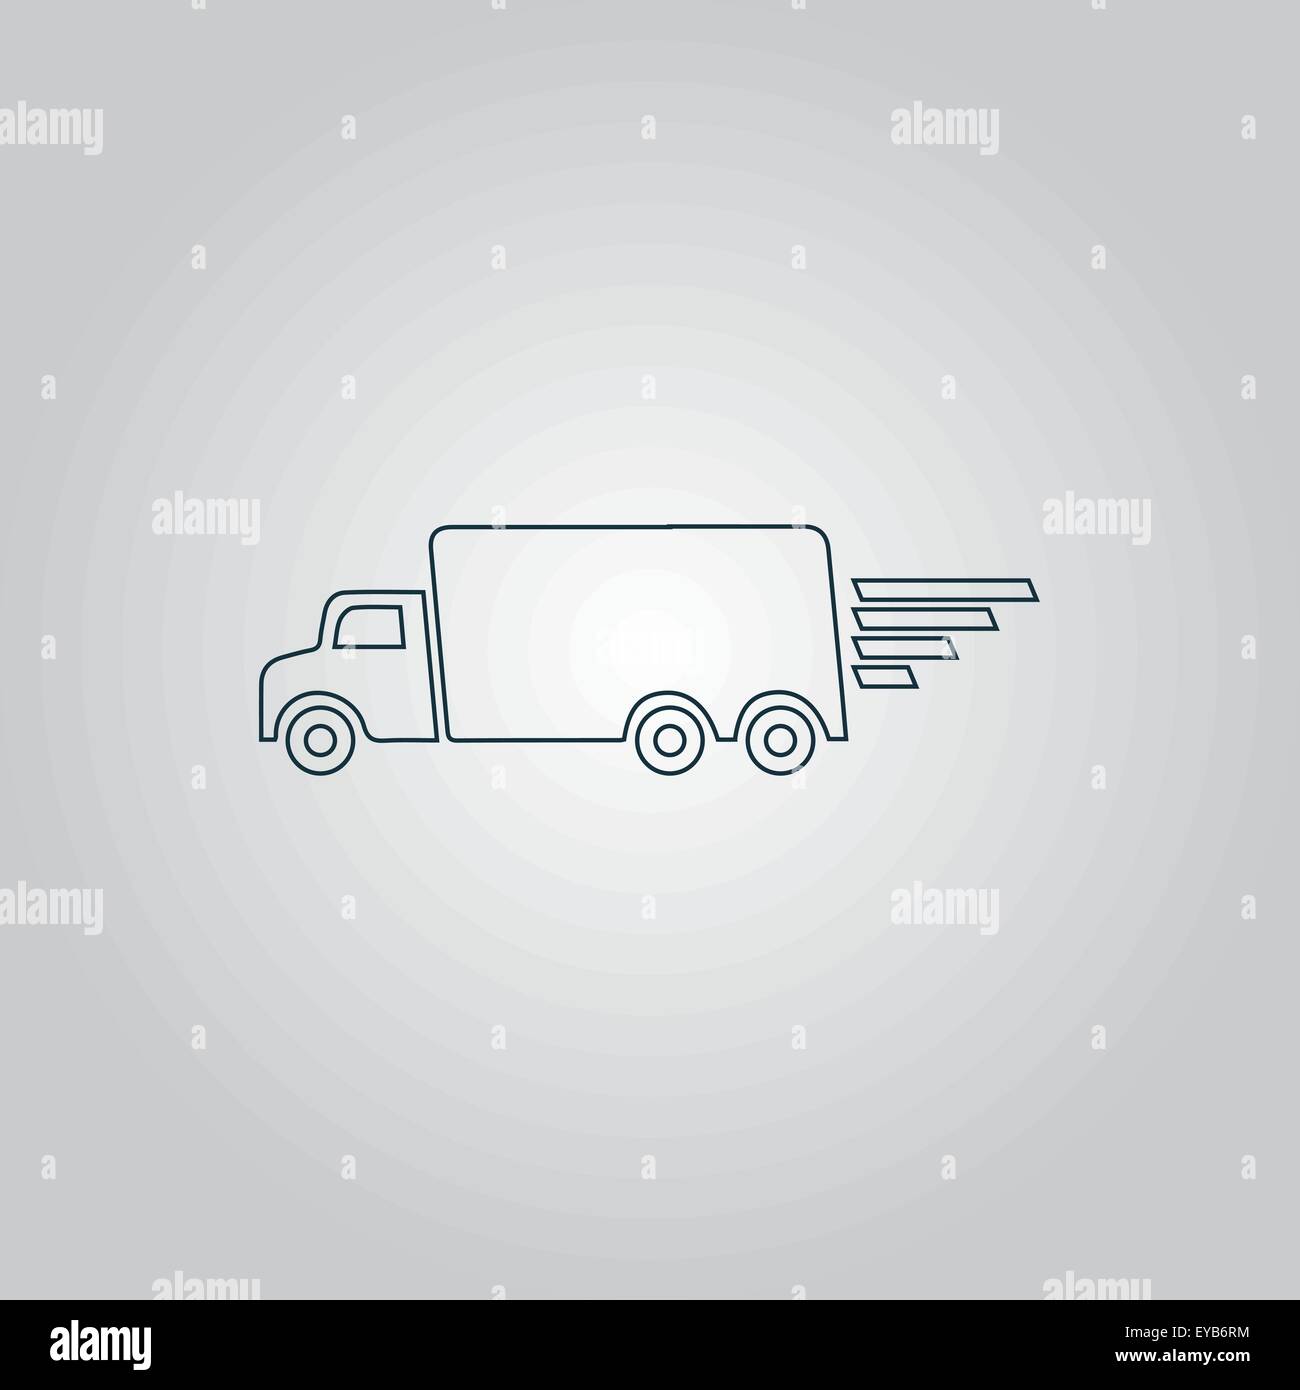 delivery sign icon Stock Vector